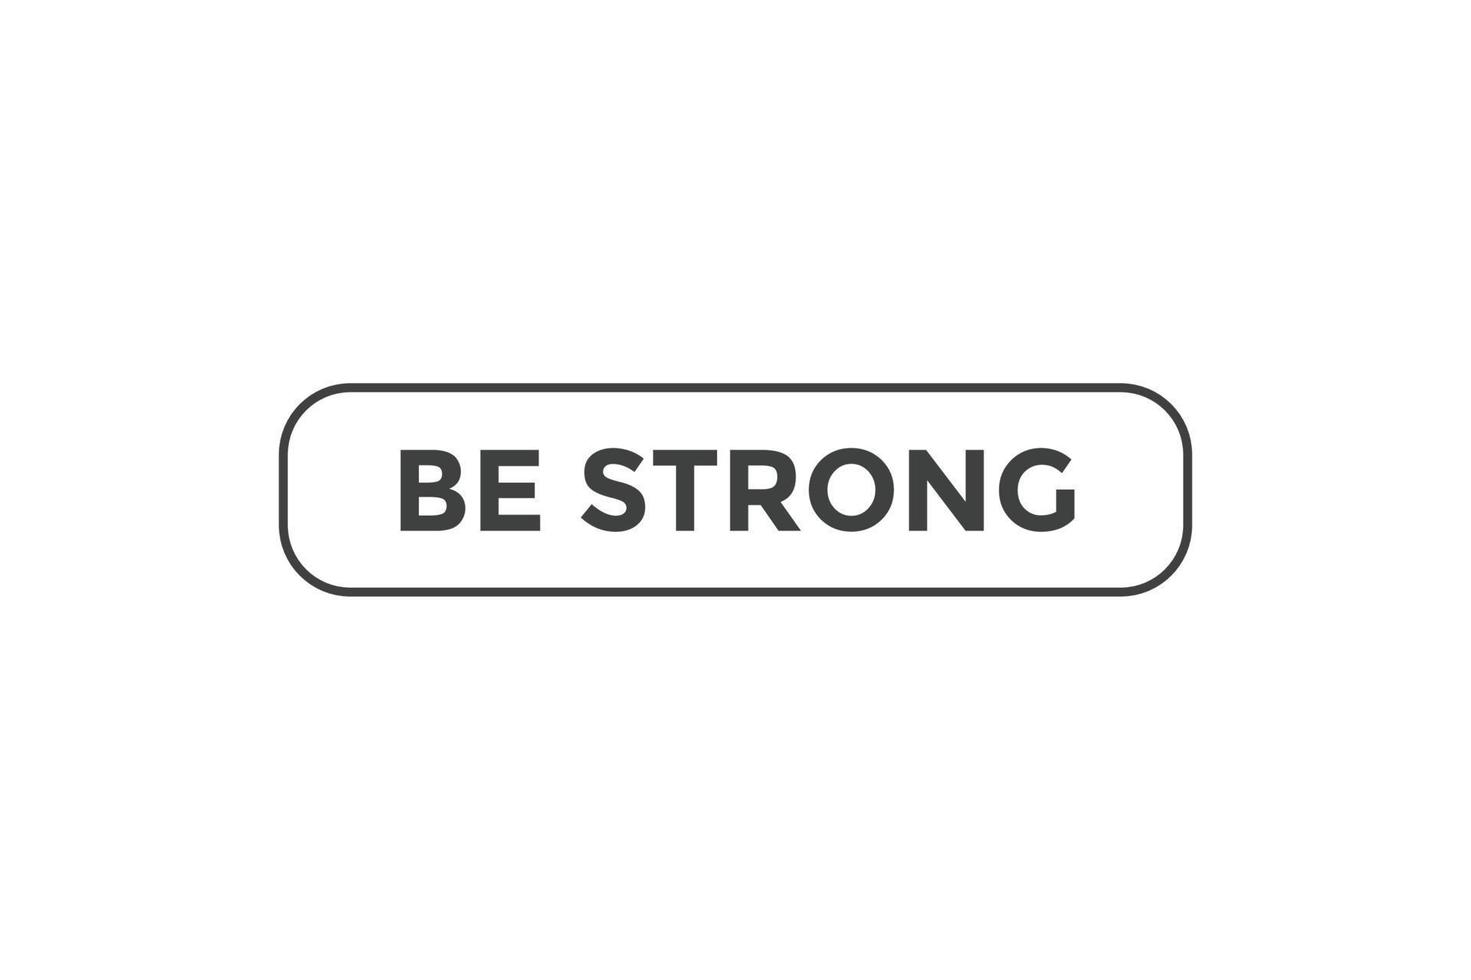 Be strong button web banner templates. Vector Illustration